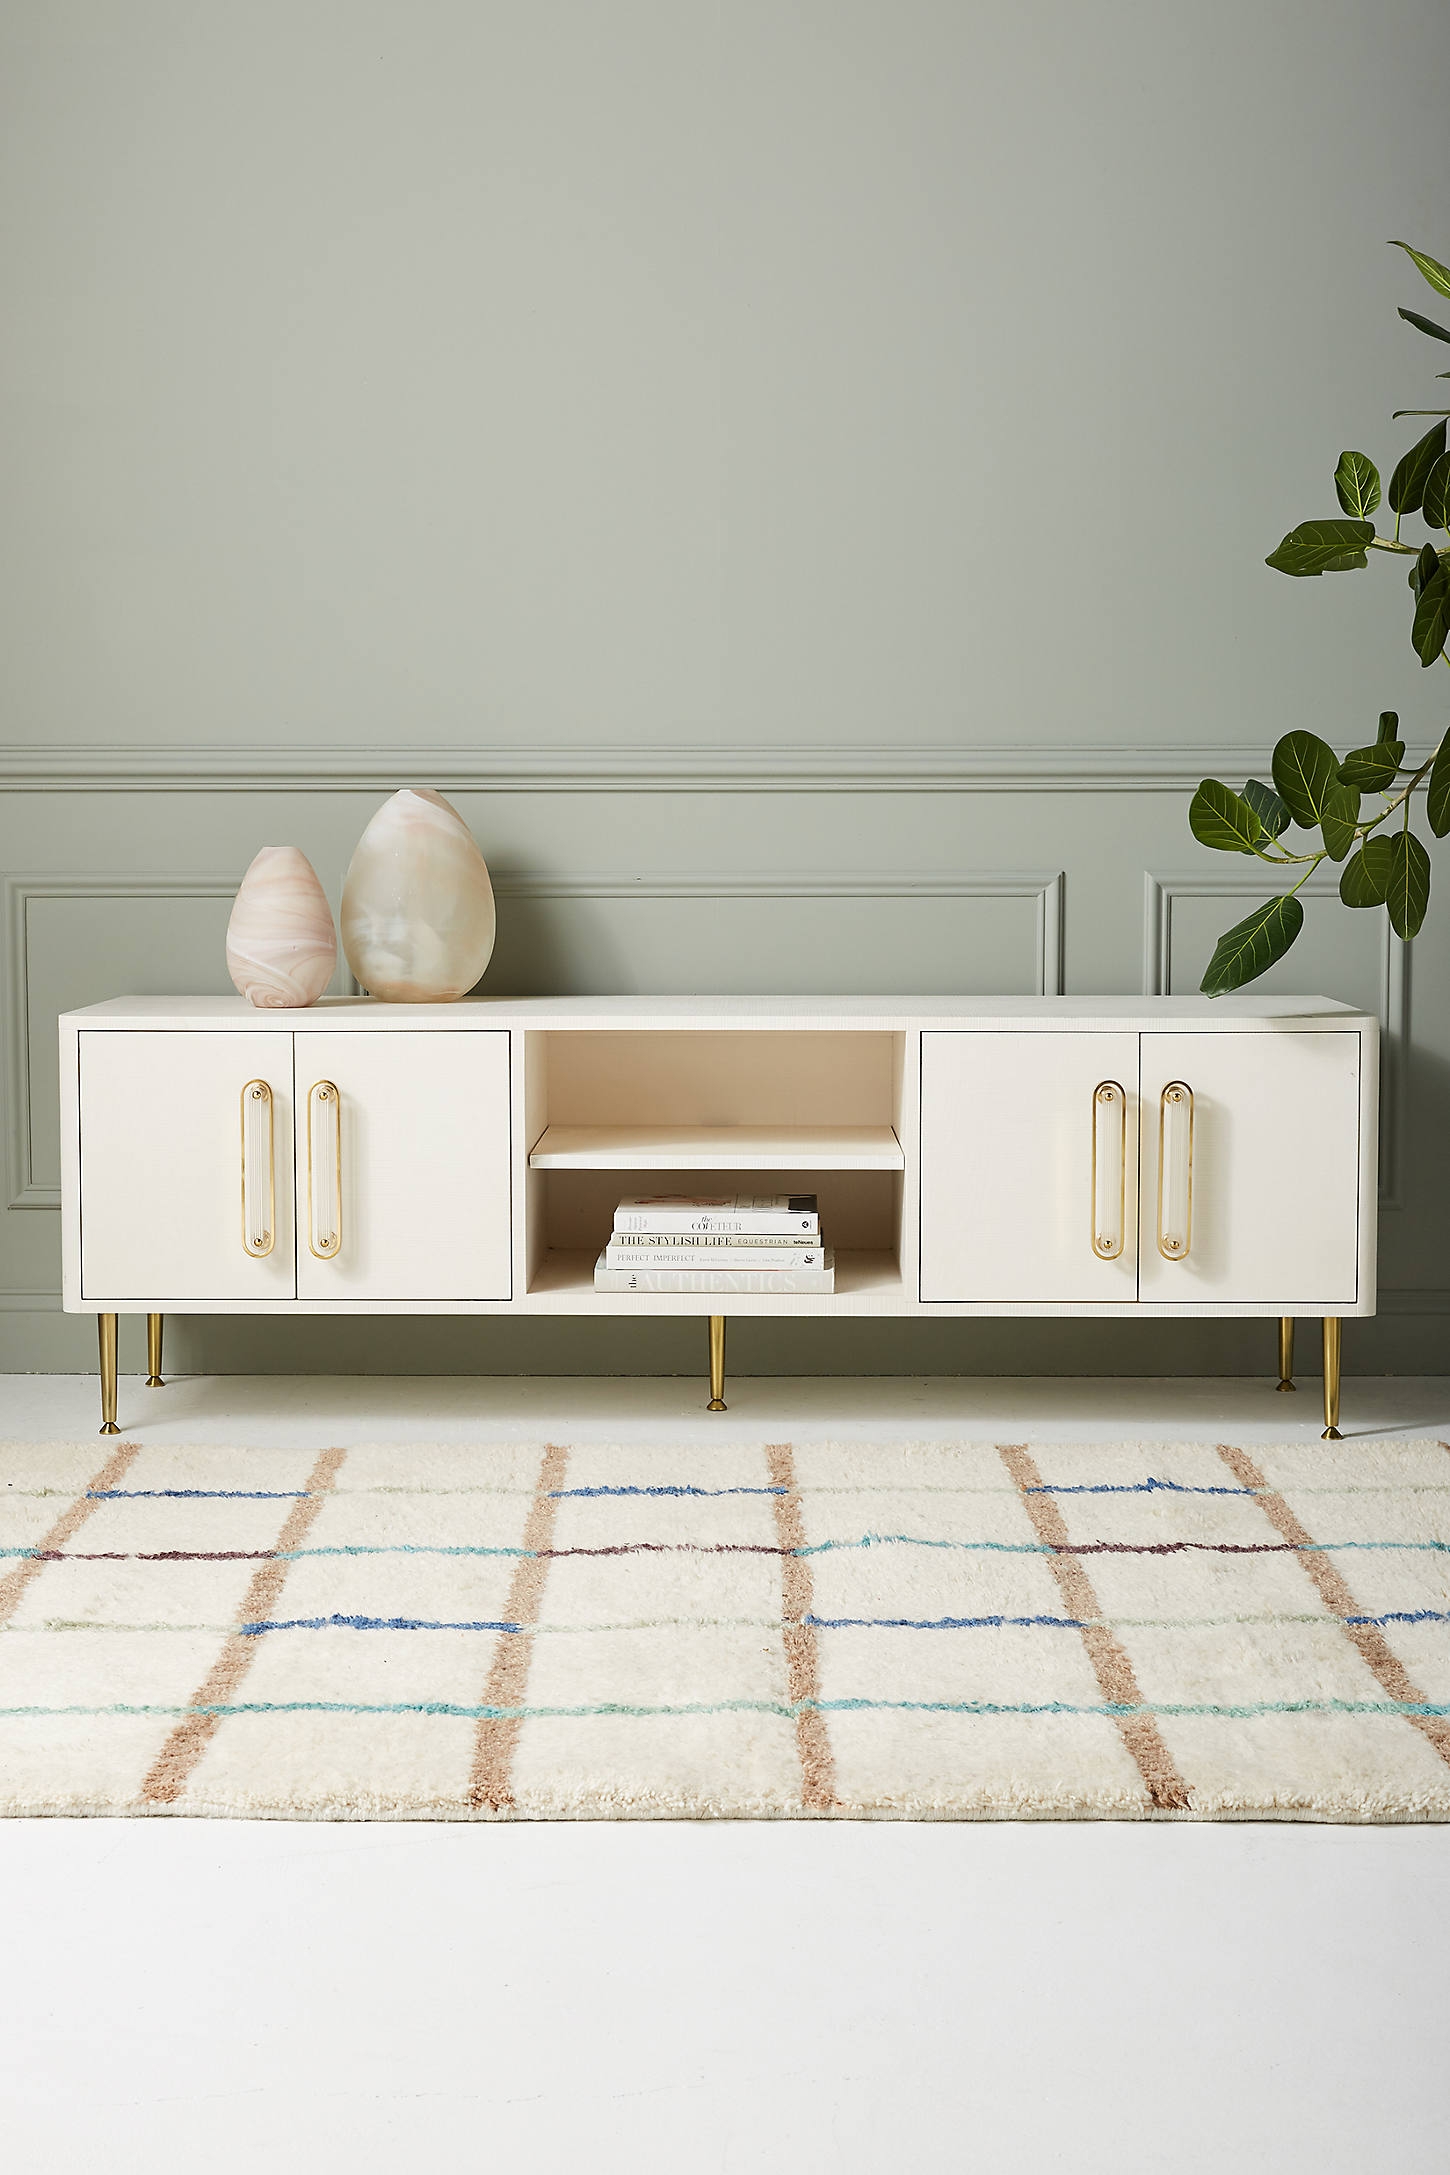 Odetta Media Console By Tracey Boyd in Beige - Image 1